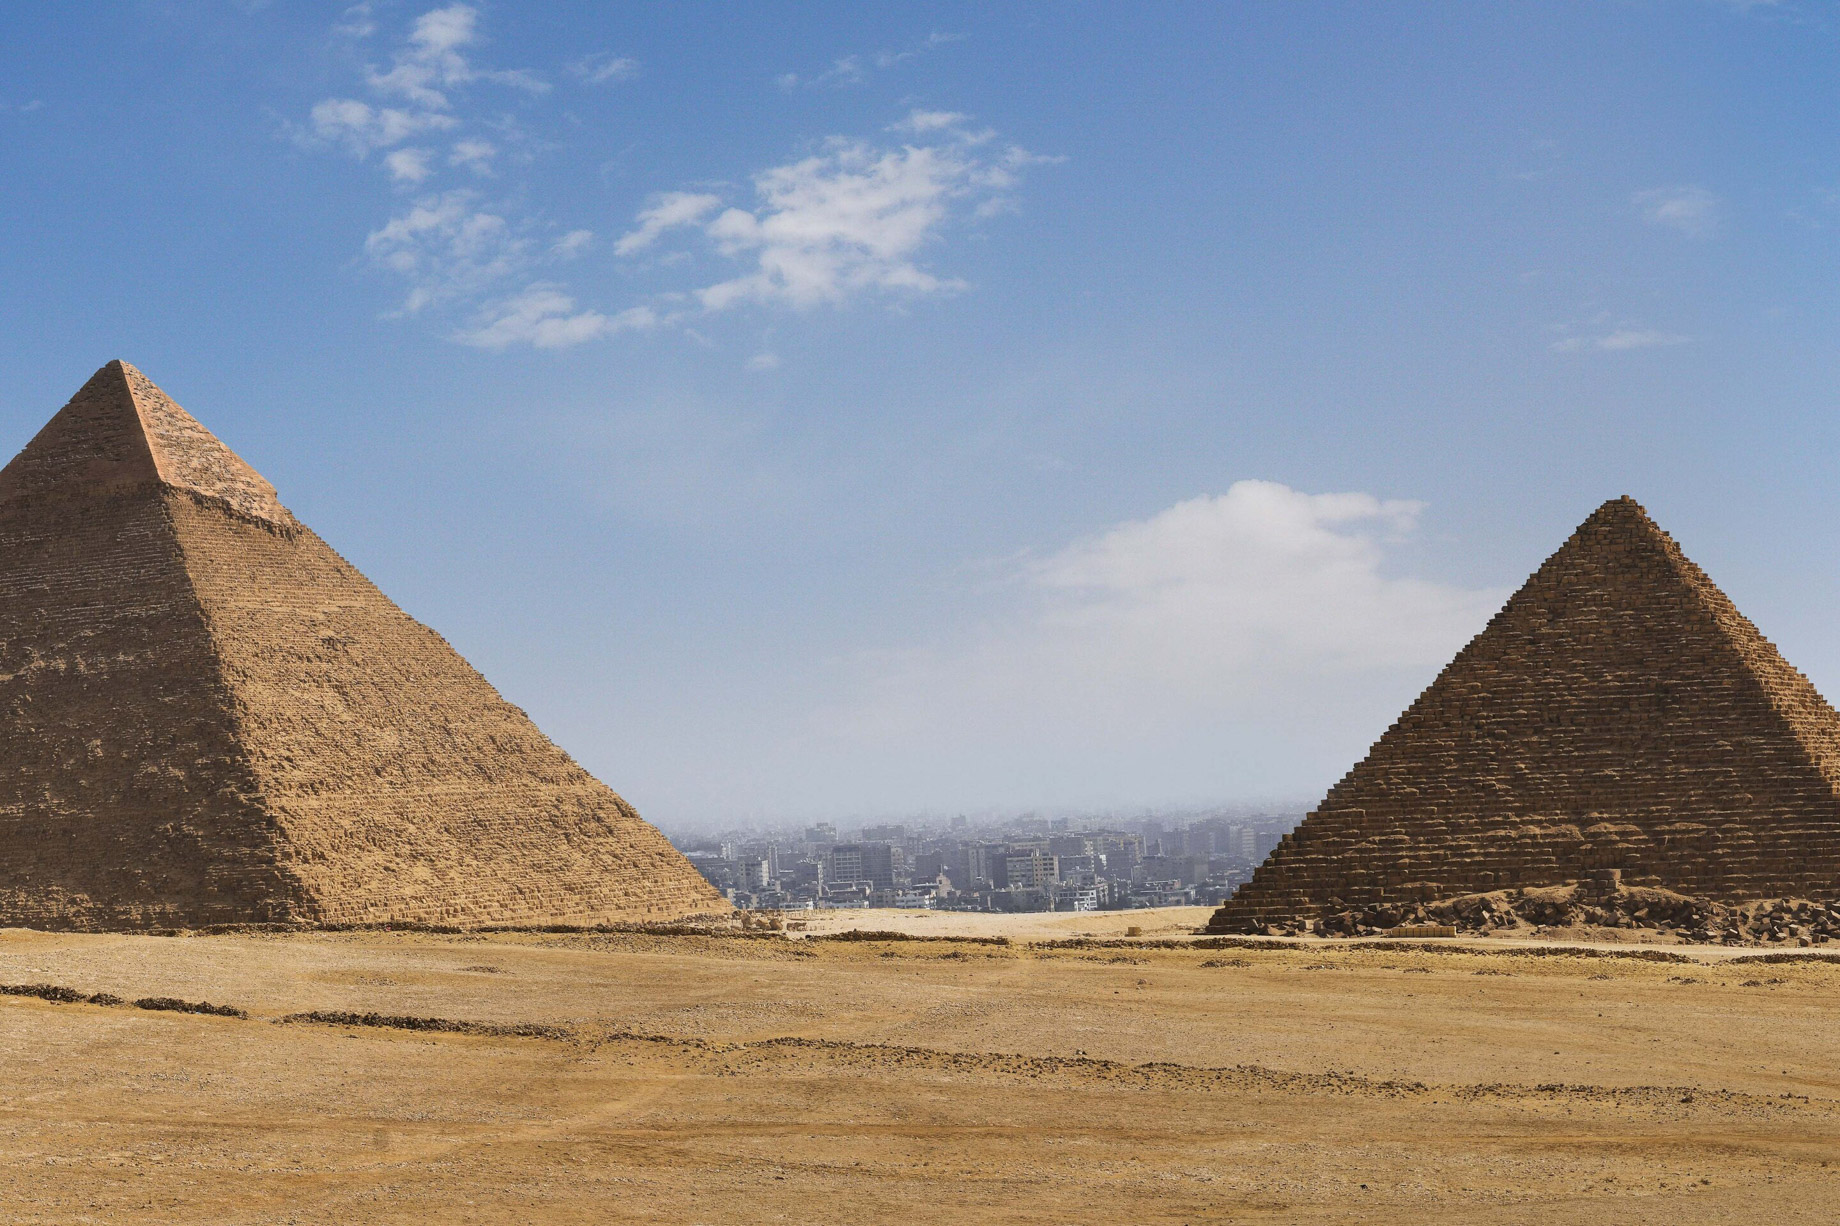 The St. Regis Cairo Hotel - Cairo, Egypt - The Great Pyramids of Giza